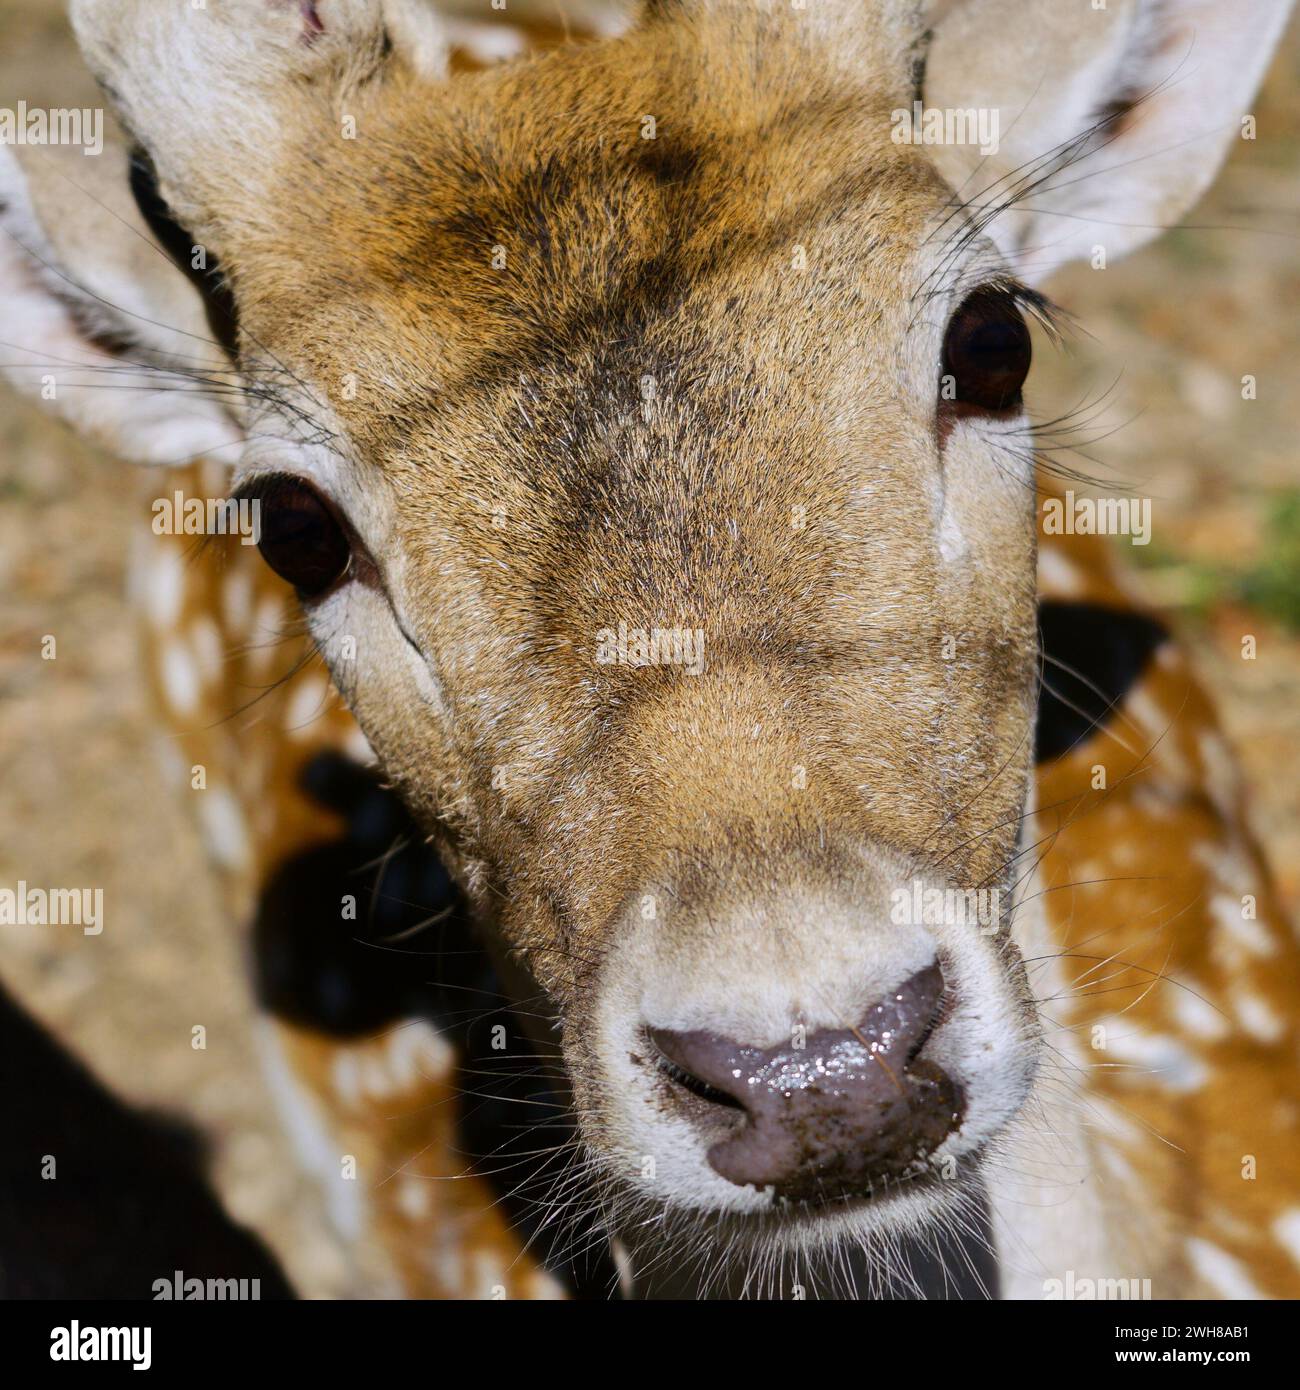 Close up head shot of a beautiful deer making direct eye contact with the photographer. Stock Photo